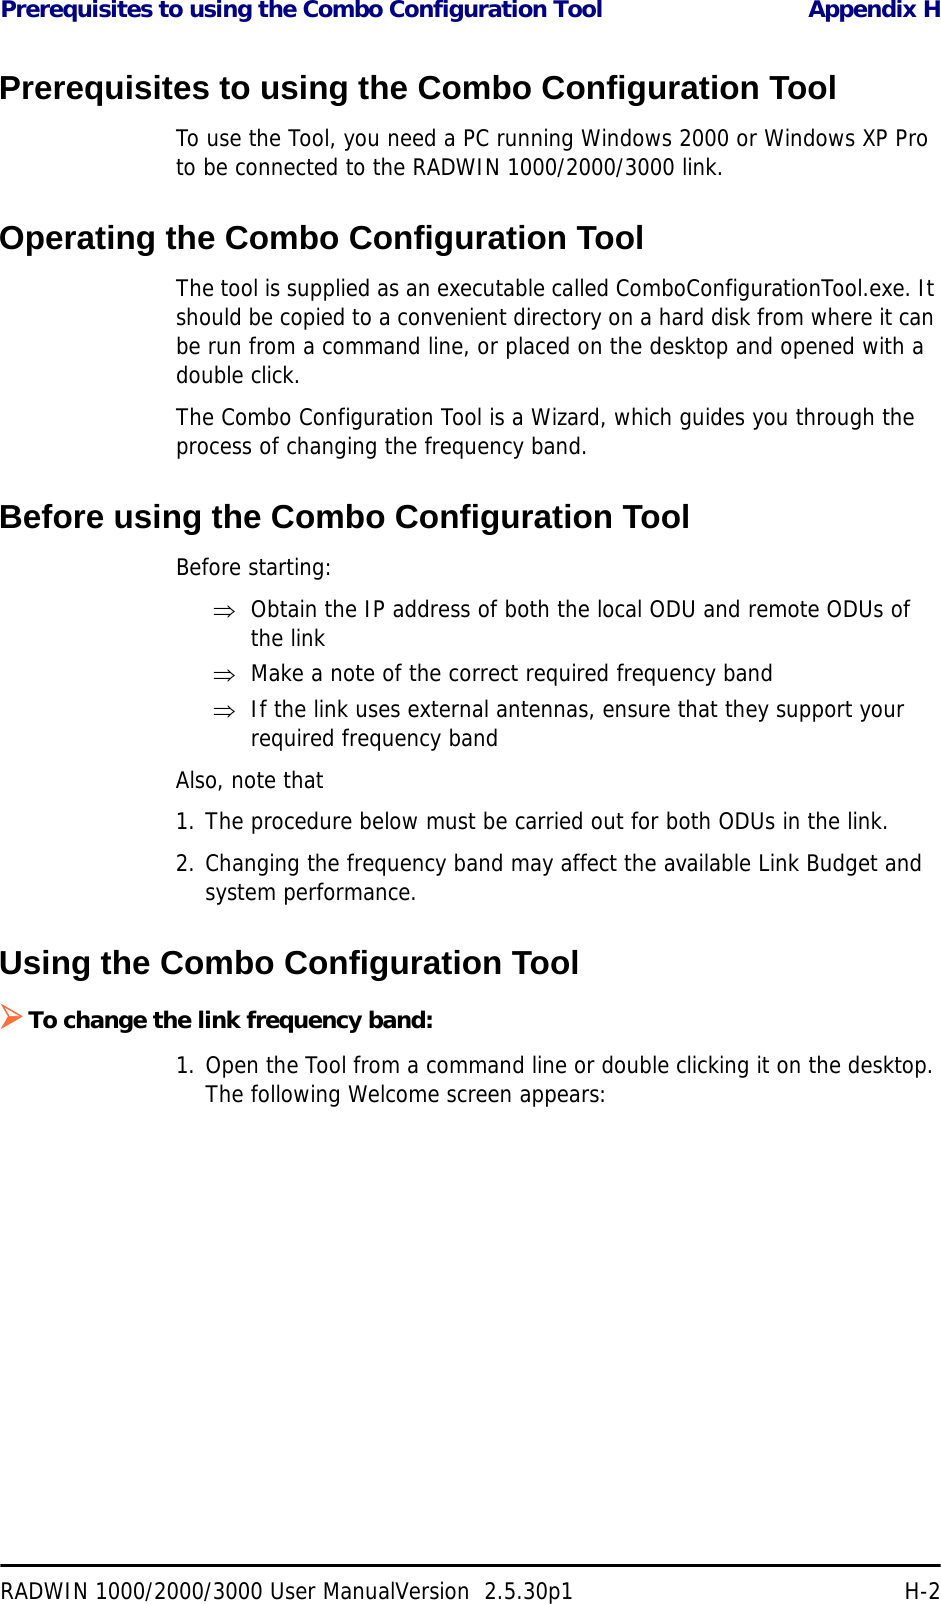 Prerequisites to using the Combo Configuration Tool Appendix HRADWIN 1000/2000/3000 User ManualVersion  2.5.30p1 H-2Prerequisites to using the Combo Configuration ToolTo use the Tool, you need a PC running Windows 2000 or Windows XP Pro to be connected to the RADWIN 1000/2000/3000 link.Operating the Combo Configuration ToolThe tool is supplied as an executable called ComboConfigurationTool.exe. It should be copied to a convenient directory on a hard disk from where it can be run from a command line, or placed on the desktop and opened with a double click.The Combo Configuration Tool is a Wizard, which guides you through the process of changing the frequency band. Before using the Combo Configuration ToolBefore starting:⇒Obtain the IP address of both the local ODU and remote ODUs of the link⇒Make a note of the correct required frequency band⇒If the link uses external antennas, ensure that they support your required frequency bandAlso, note that1. The procedure below must be carried out for both ODUs in the link.2. Changing the frequency band may affect the available Link Budget and system performance.Using the Combo Configuration Tool¾To change the link frequency band:1. Open the Tool from a command line or double clicking it on the desktop. The following Welcome screen appears: